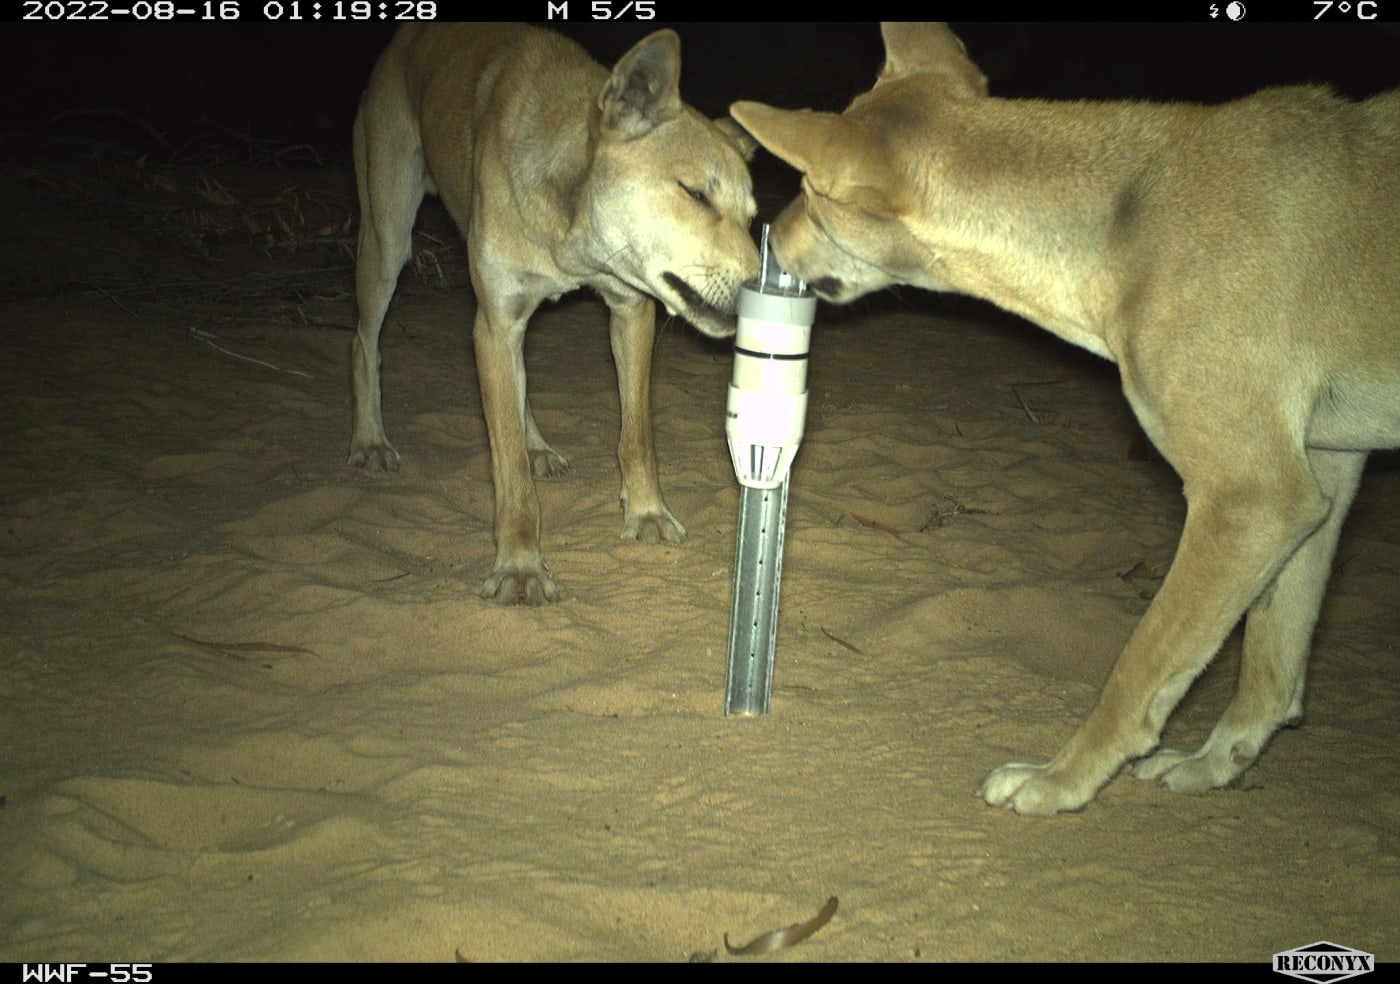 Dingo in for the smooch! These two native icons were snapped during a sweet moment of affection on Nyaliga Country